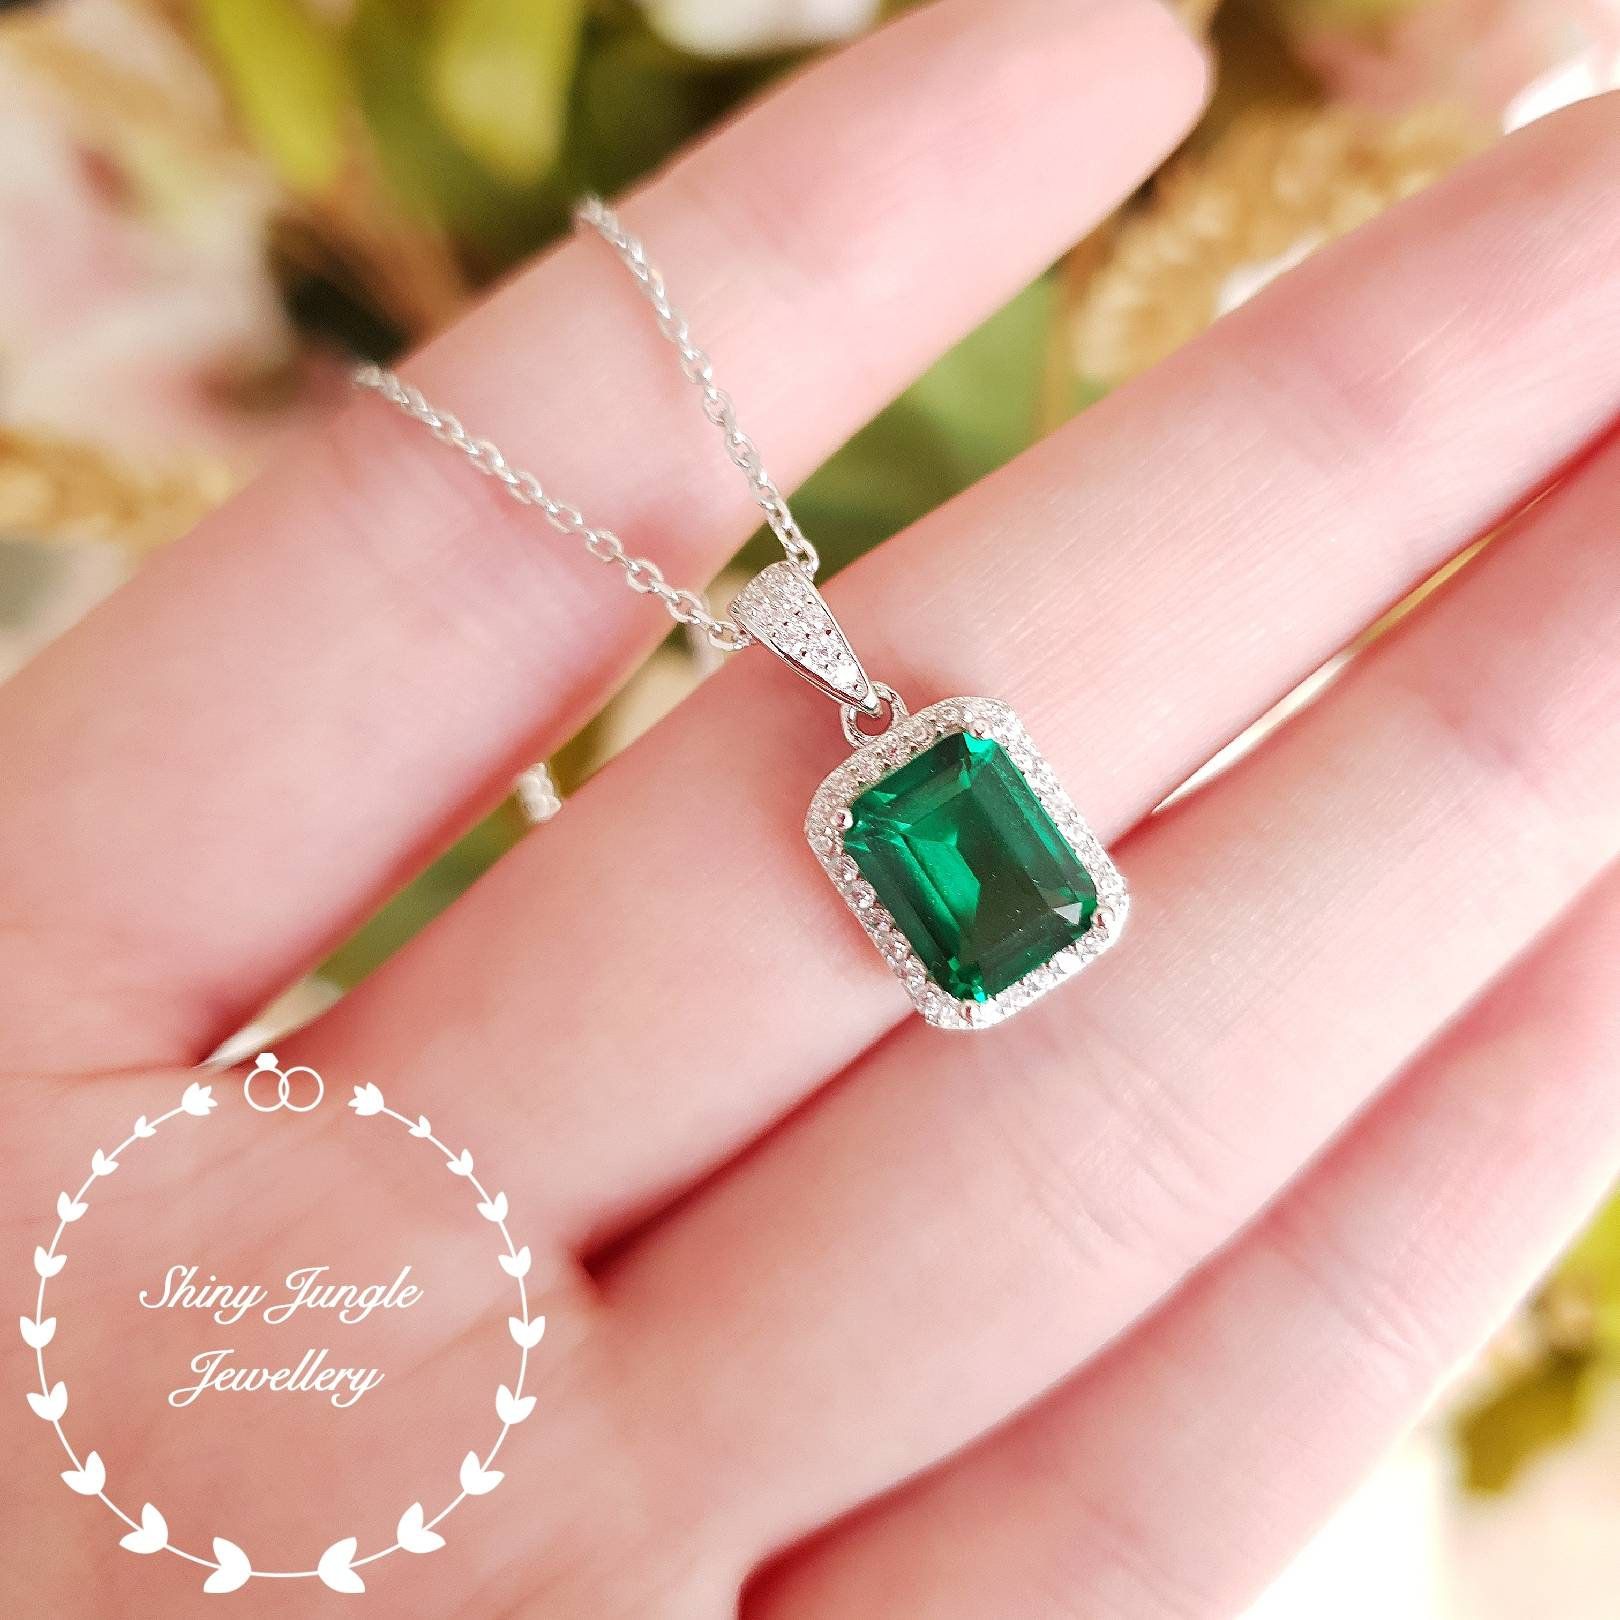 Halo Emerald Cut Emerald Pendant, Vivid Green Lab Emerald Necklace With Recent Royal Green Crystal May Droplet Pendant Necklaces (View 23 of 25)